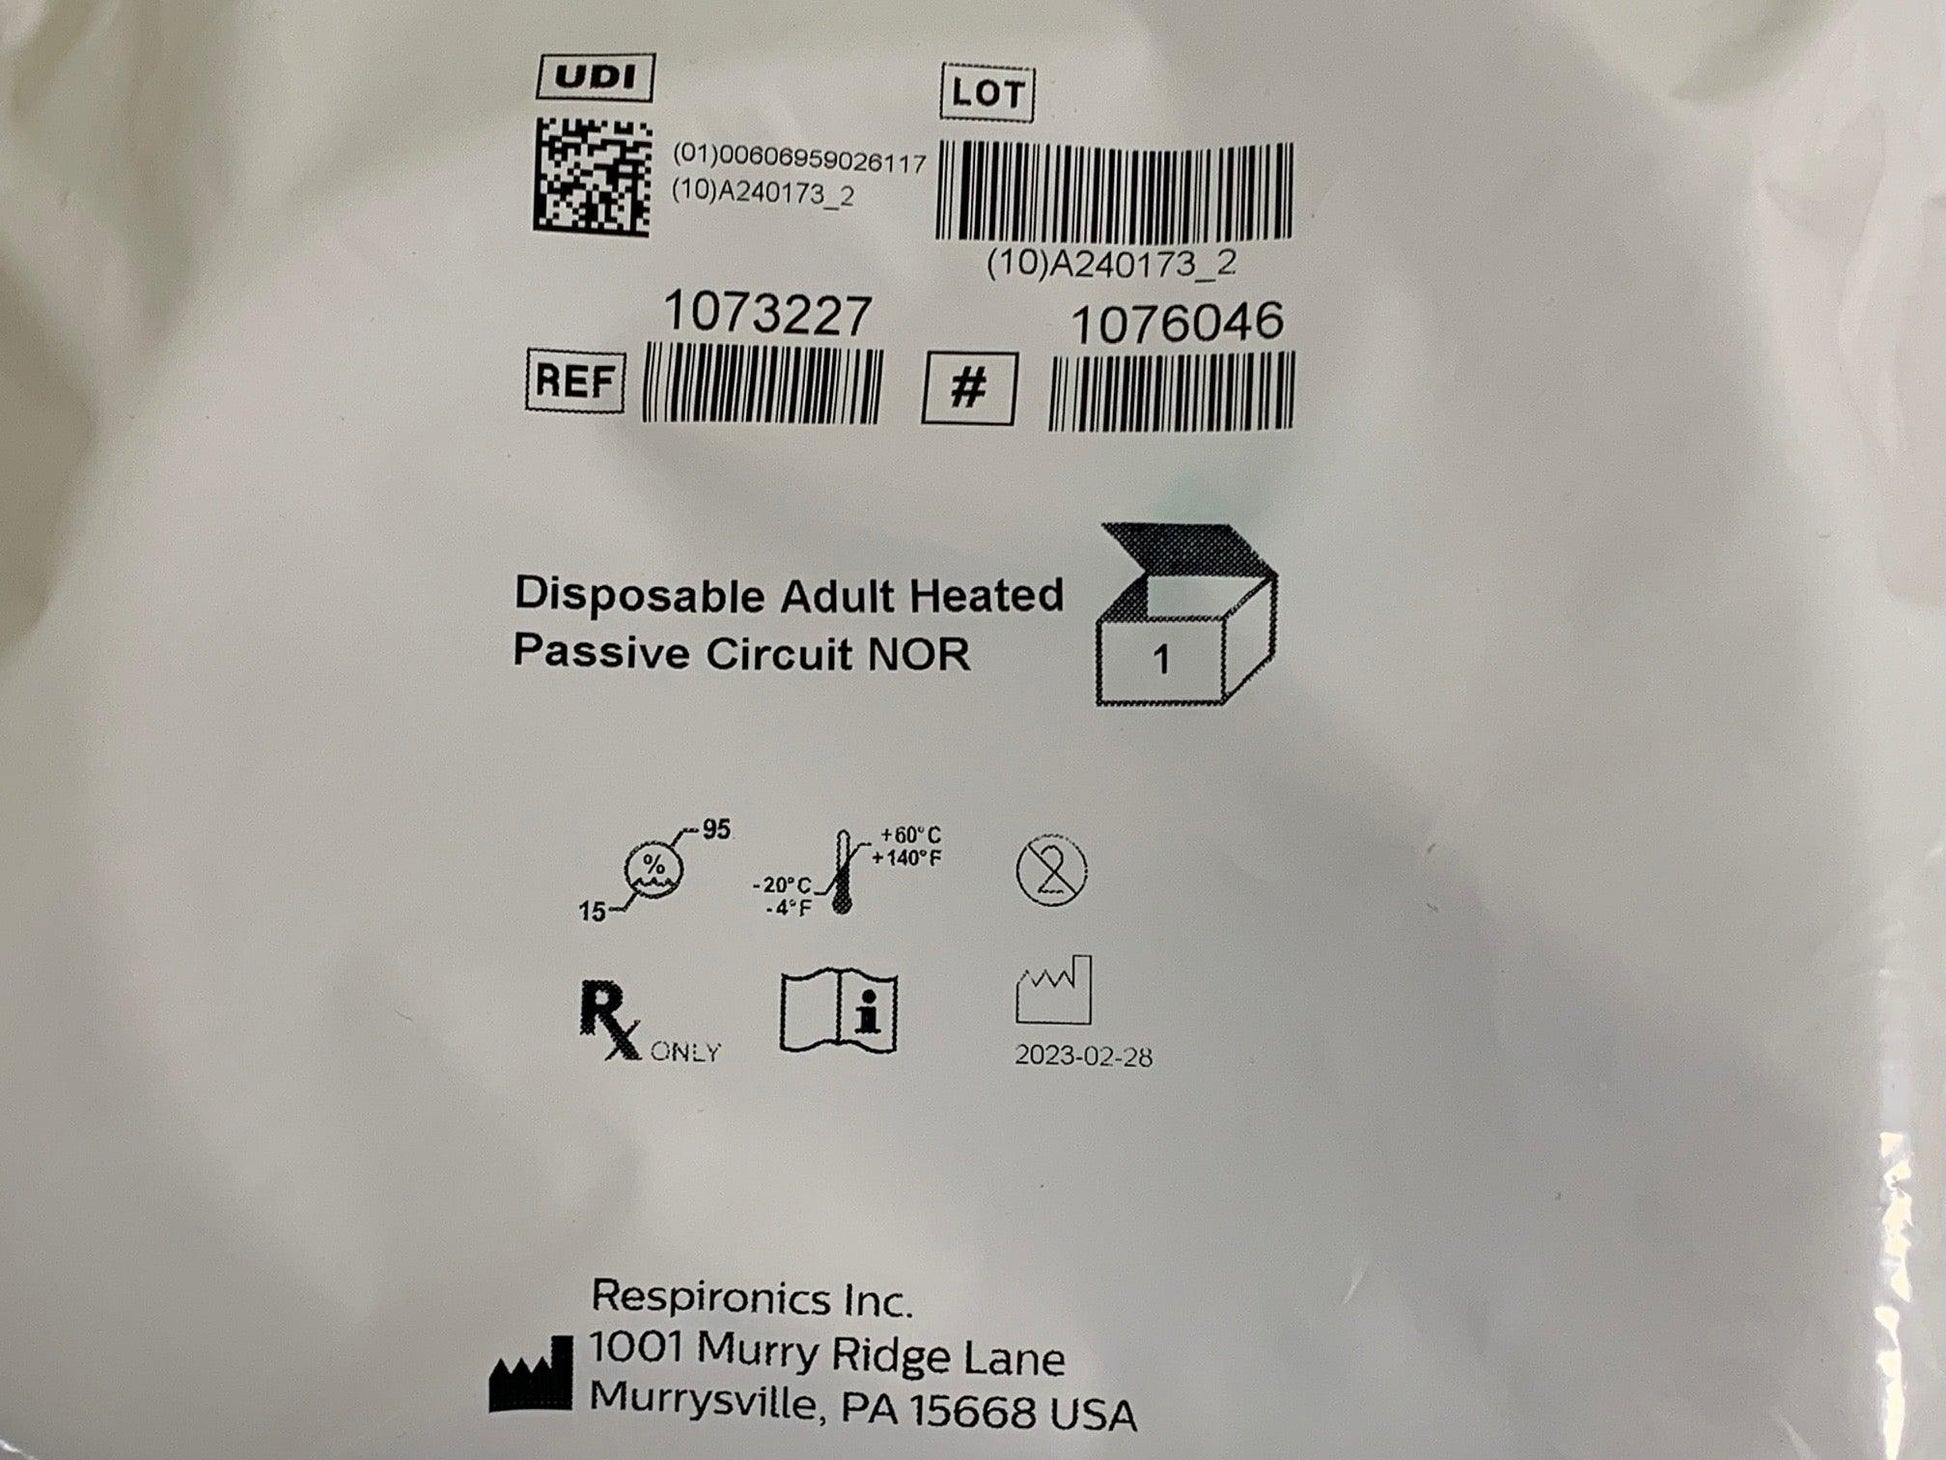 NEW 10PK Philips Respironics Disposable Adult Heated Passive Patient Circuit 1073227 - MBR Medicals